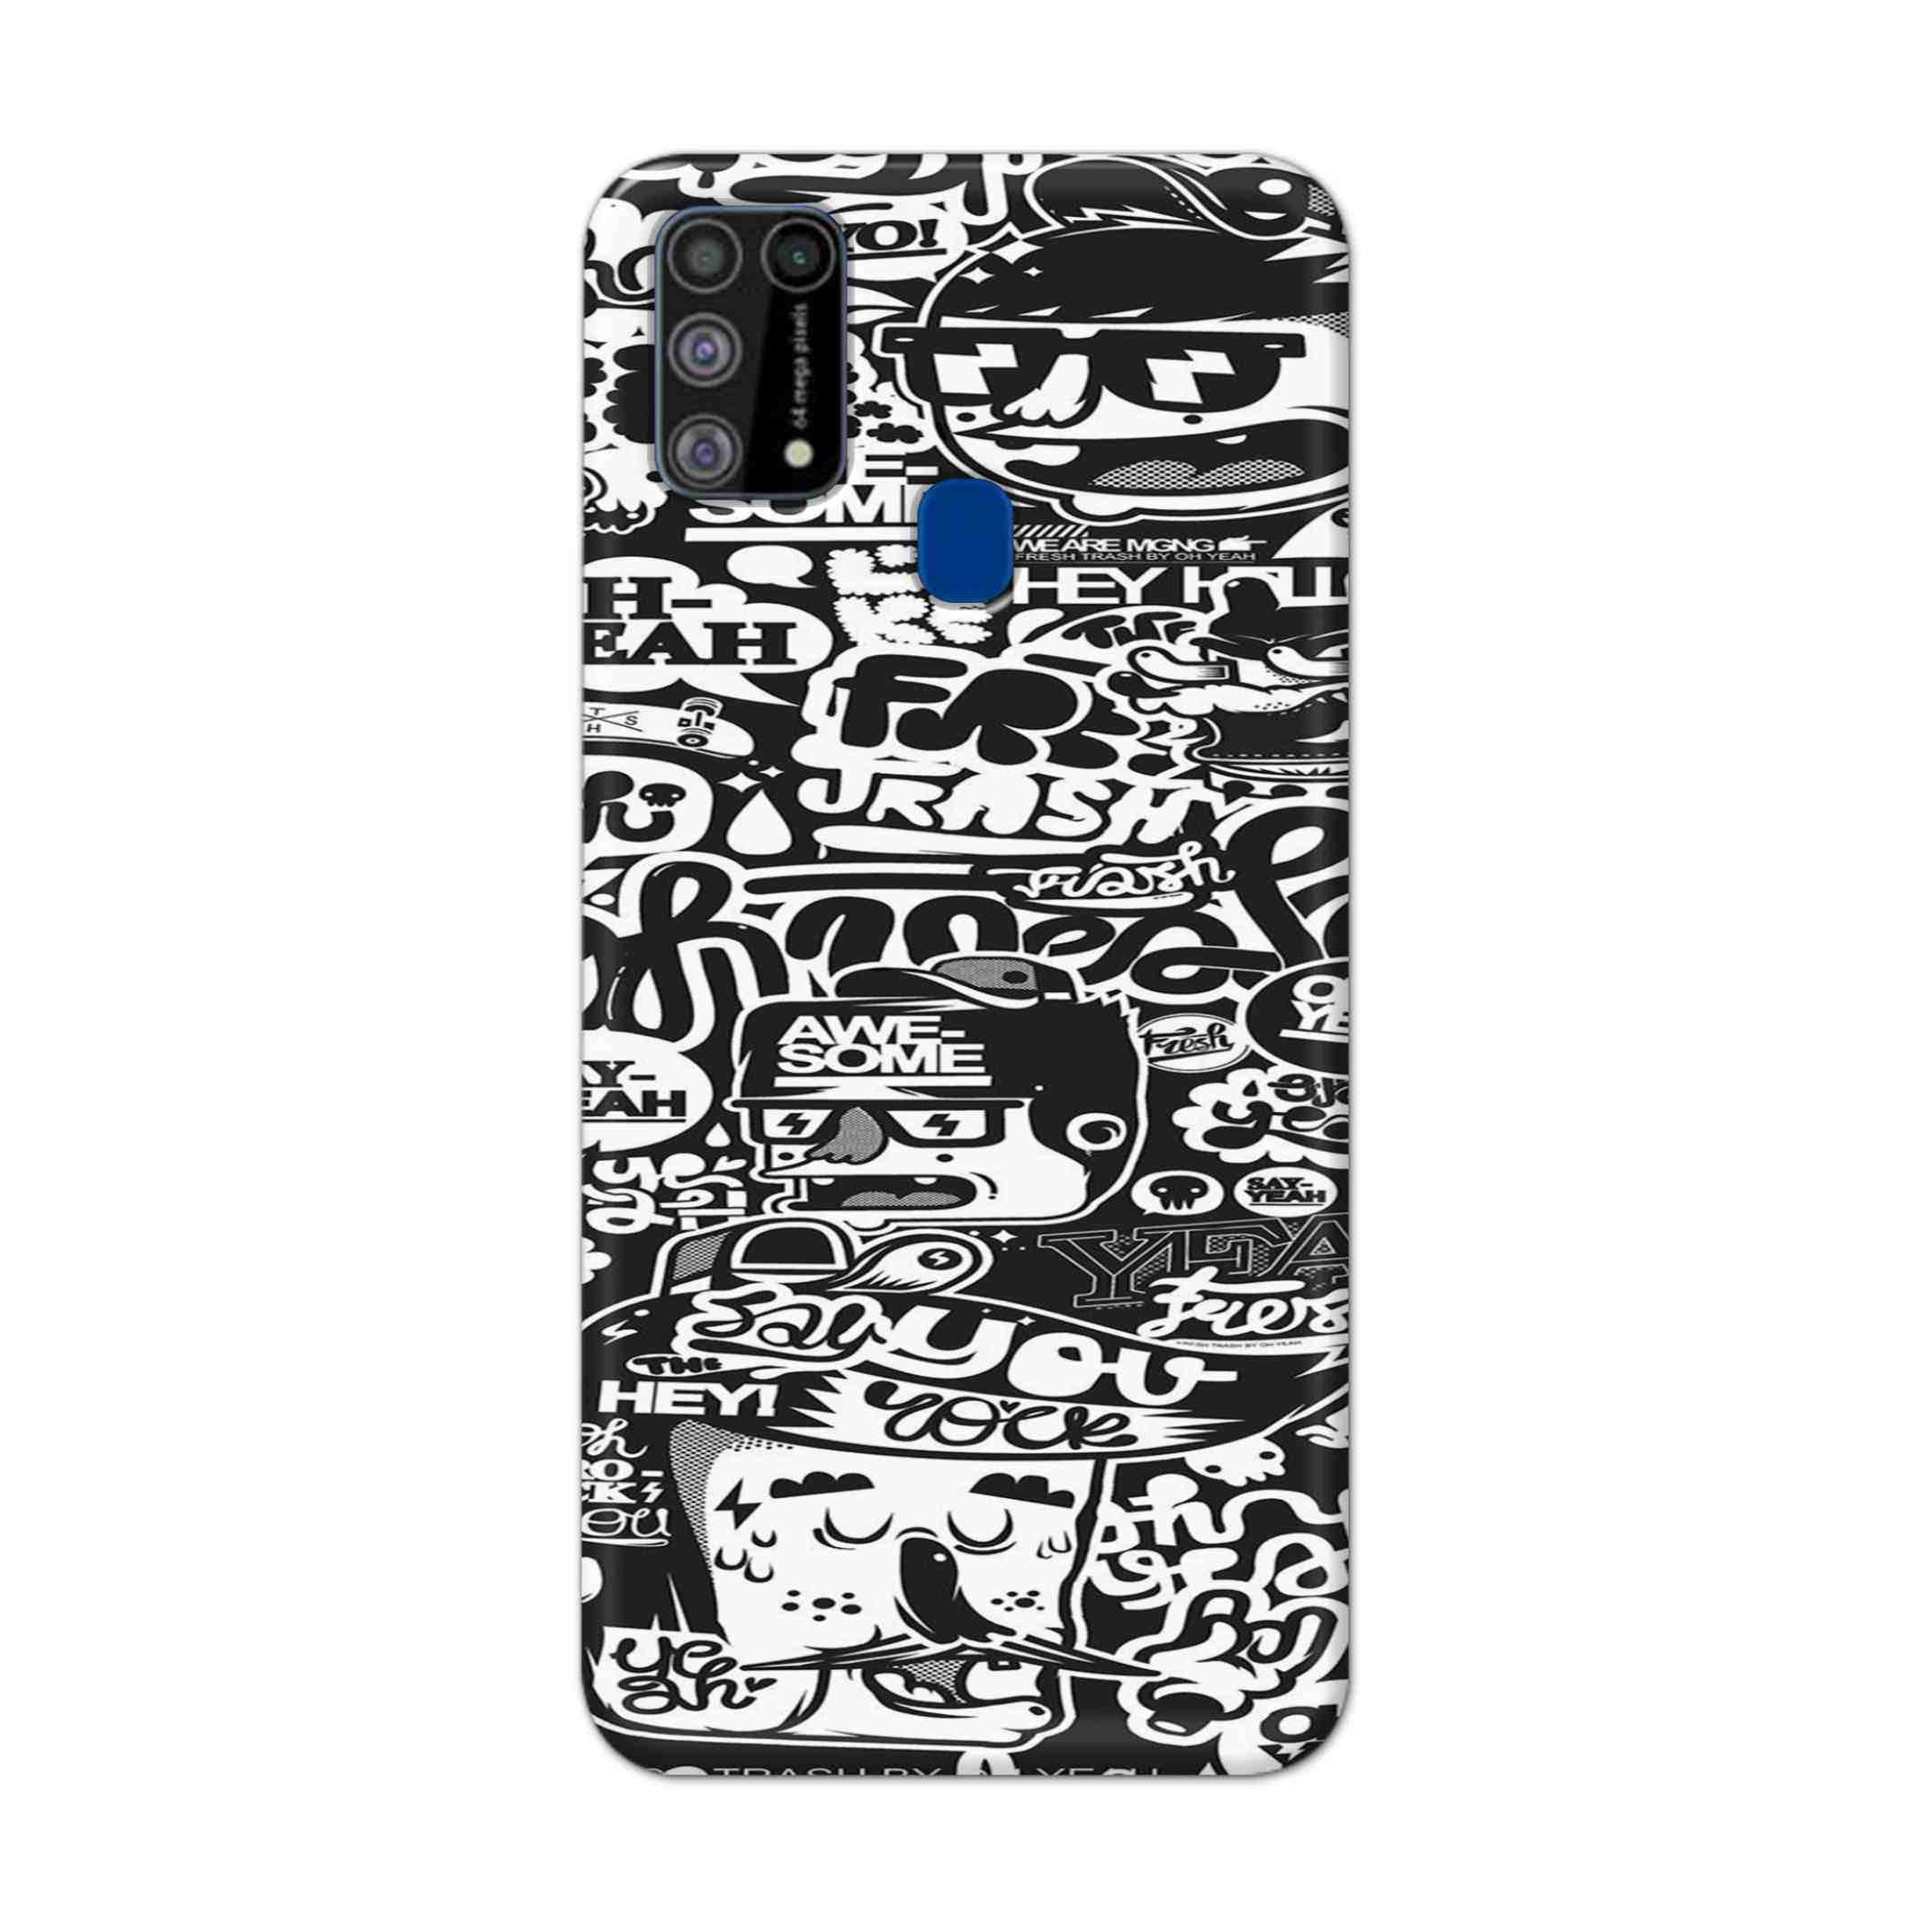 Buy Awesome Hard Back Mobile Phone Case Cover For Samsung Galaxy M31 Online